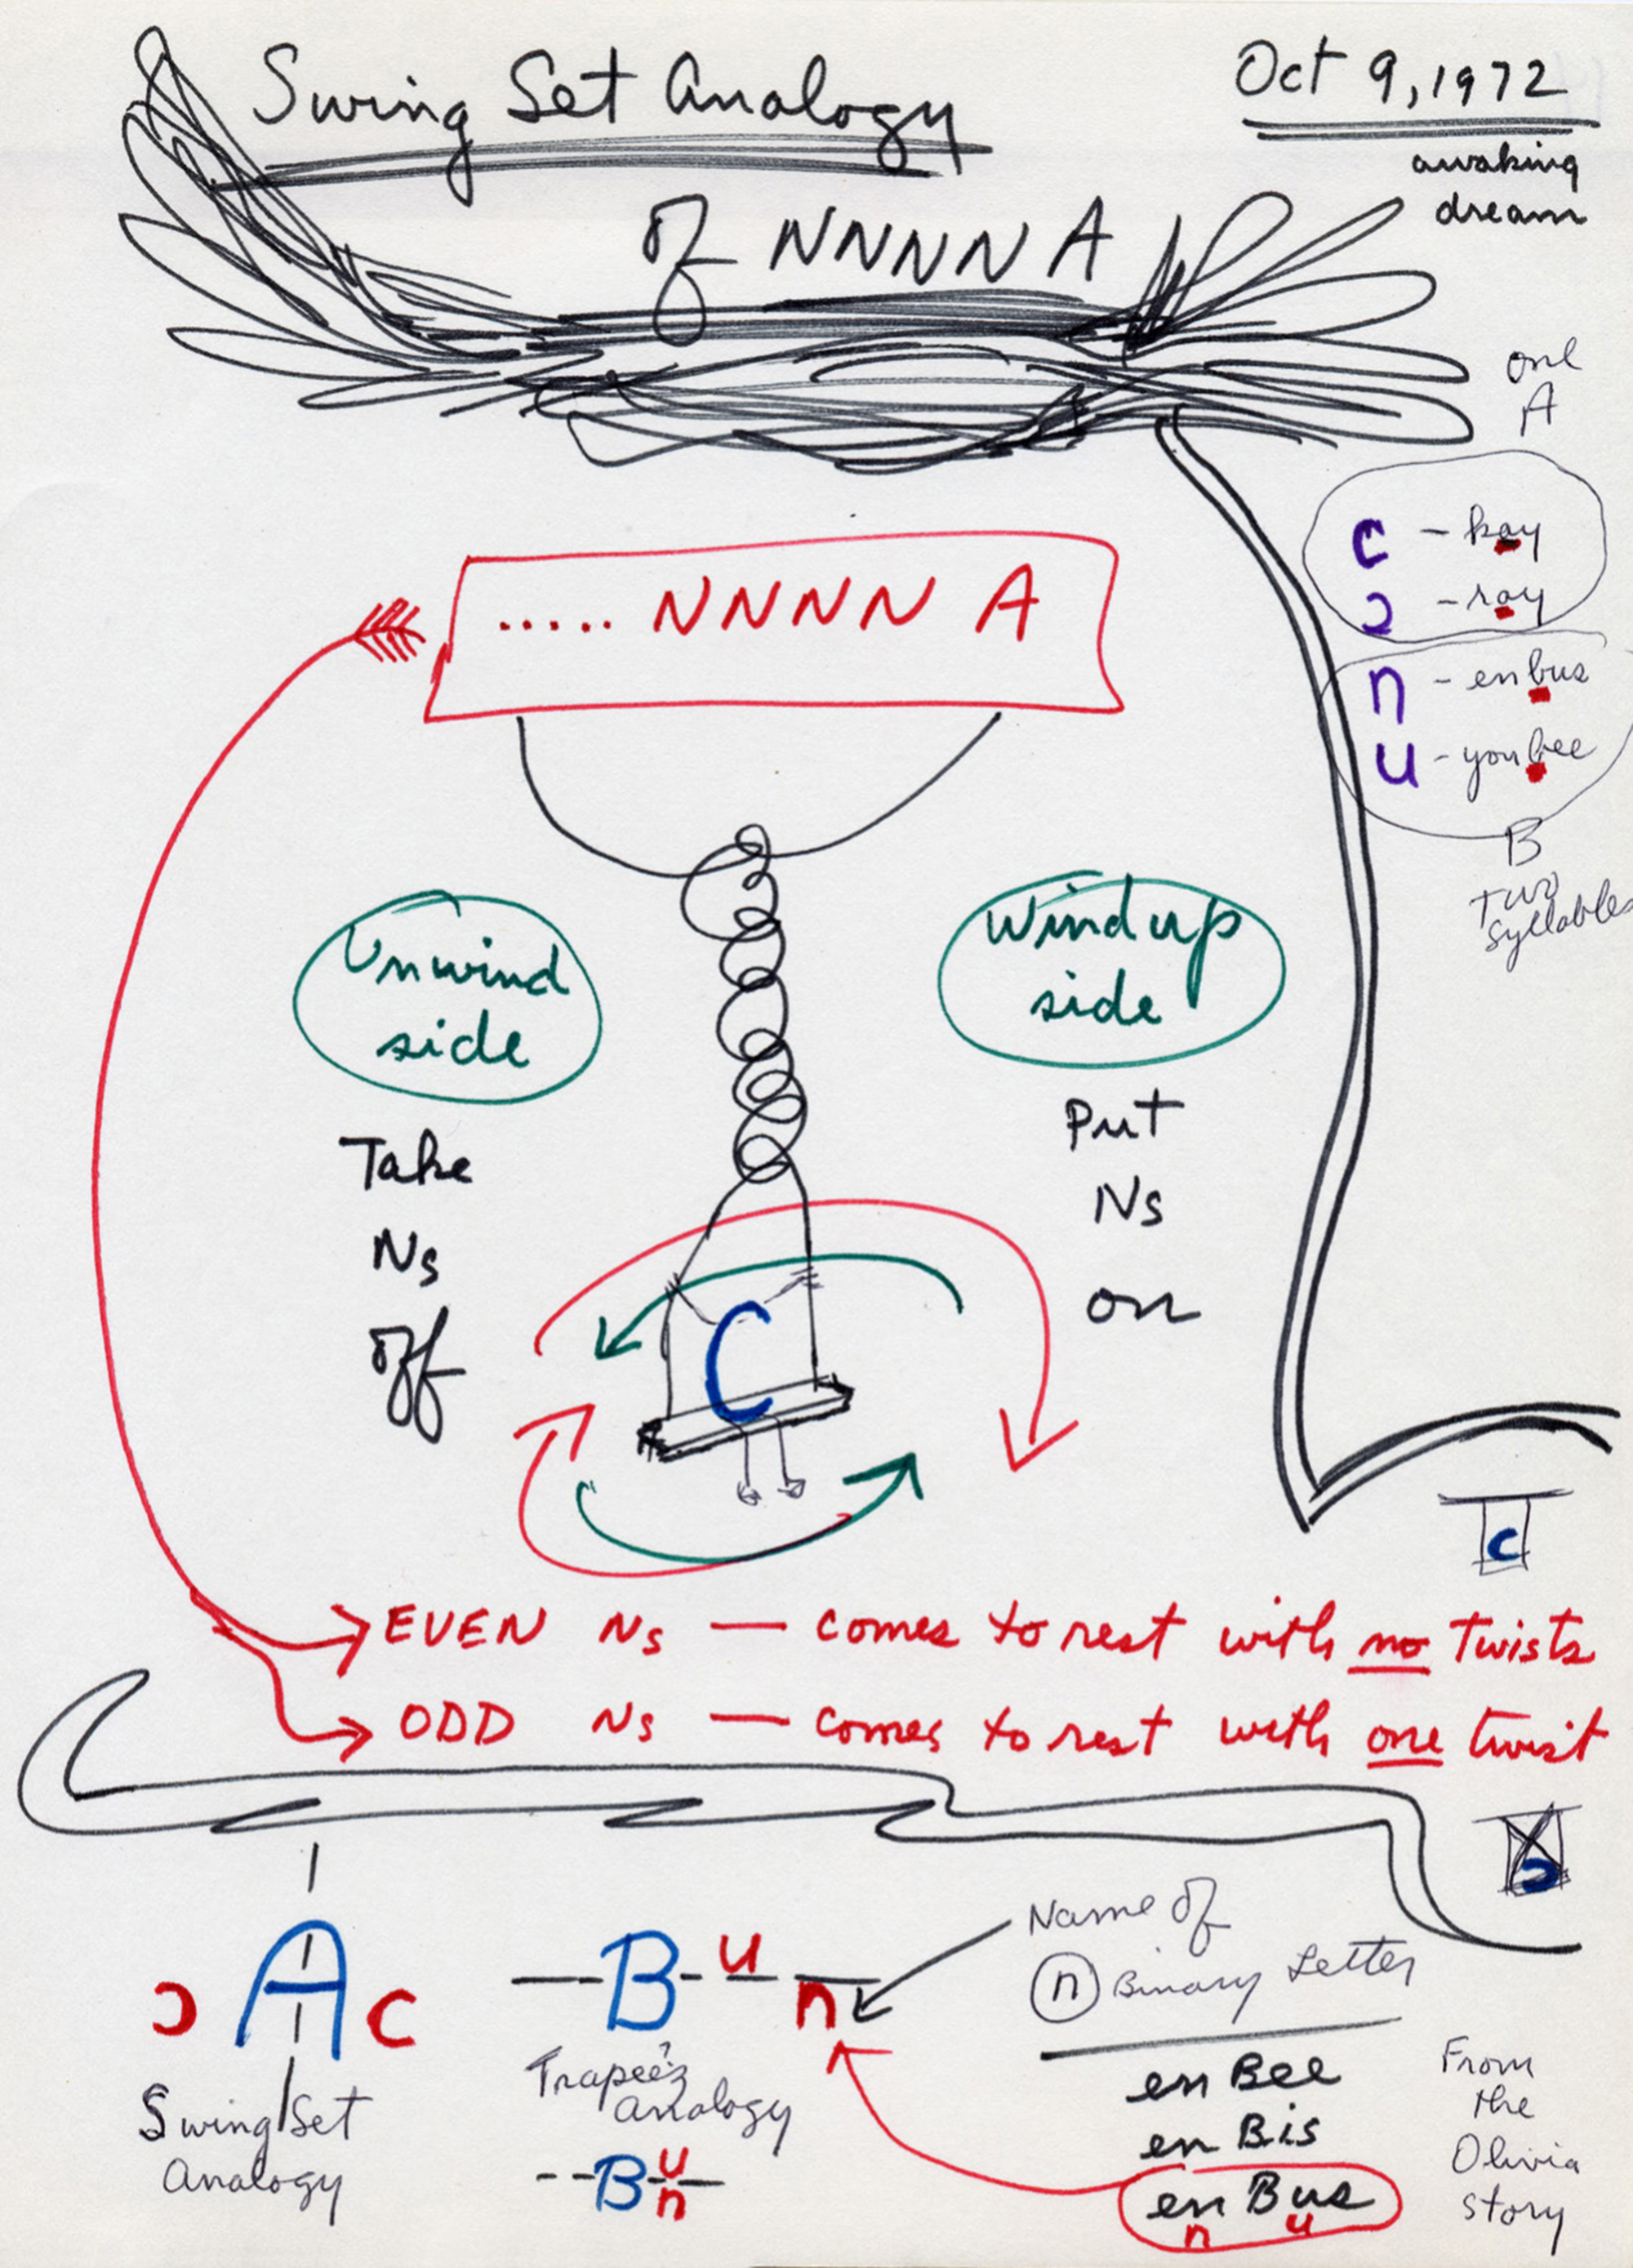 A page of Zellweger’s complex linguistic notations and diagrams, dated October 9, 1972.